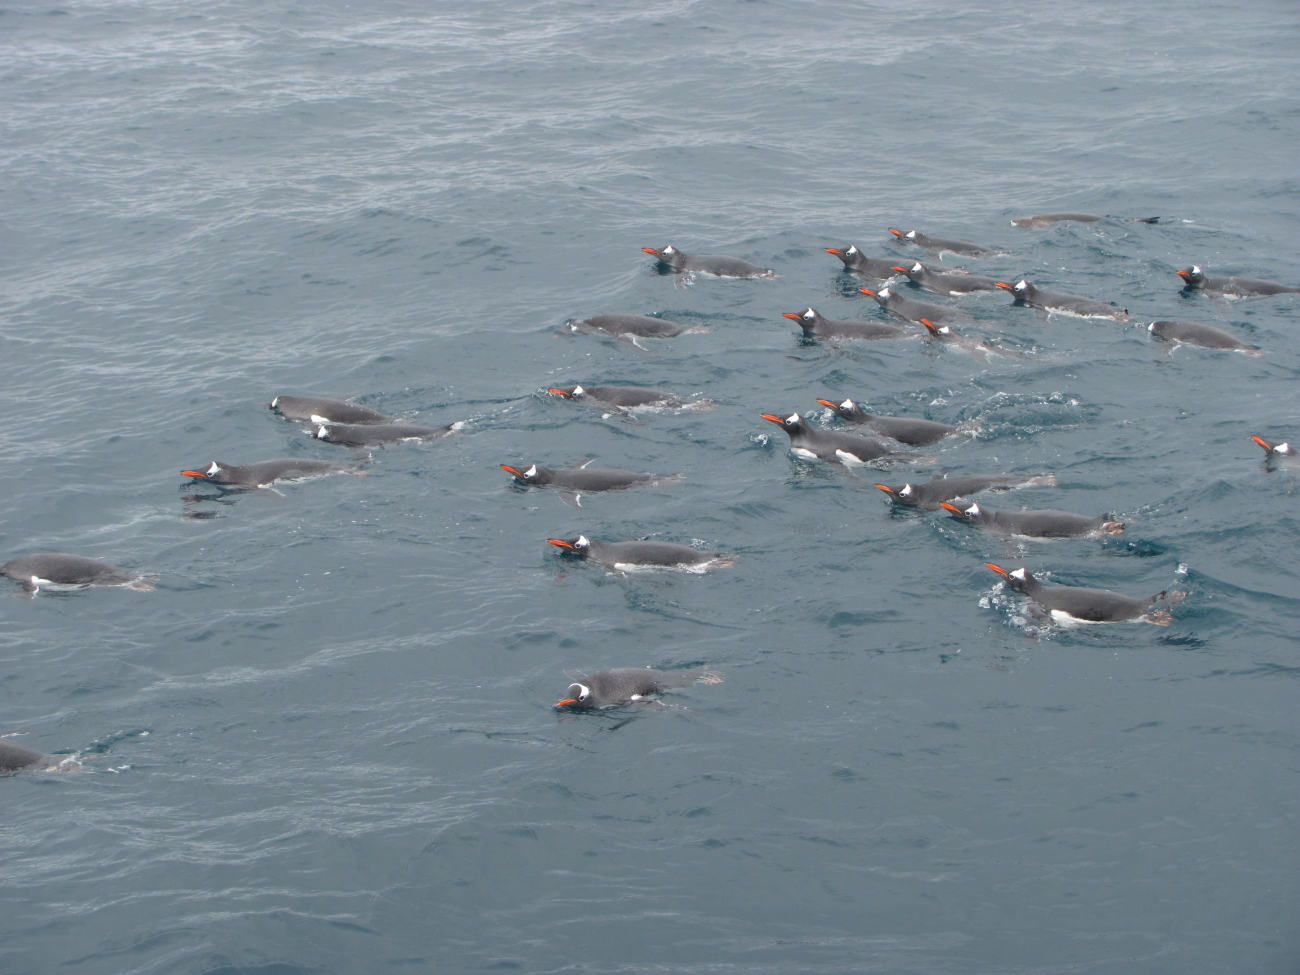 A group of swimming gentoo penguins